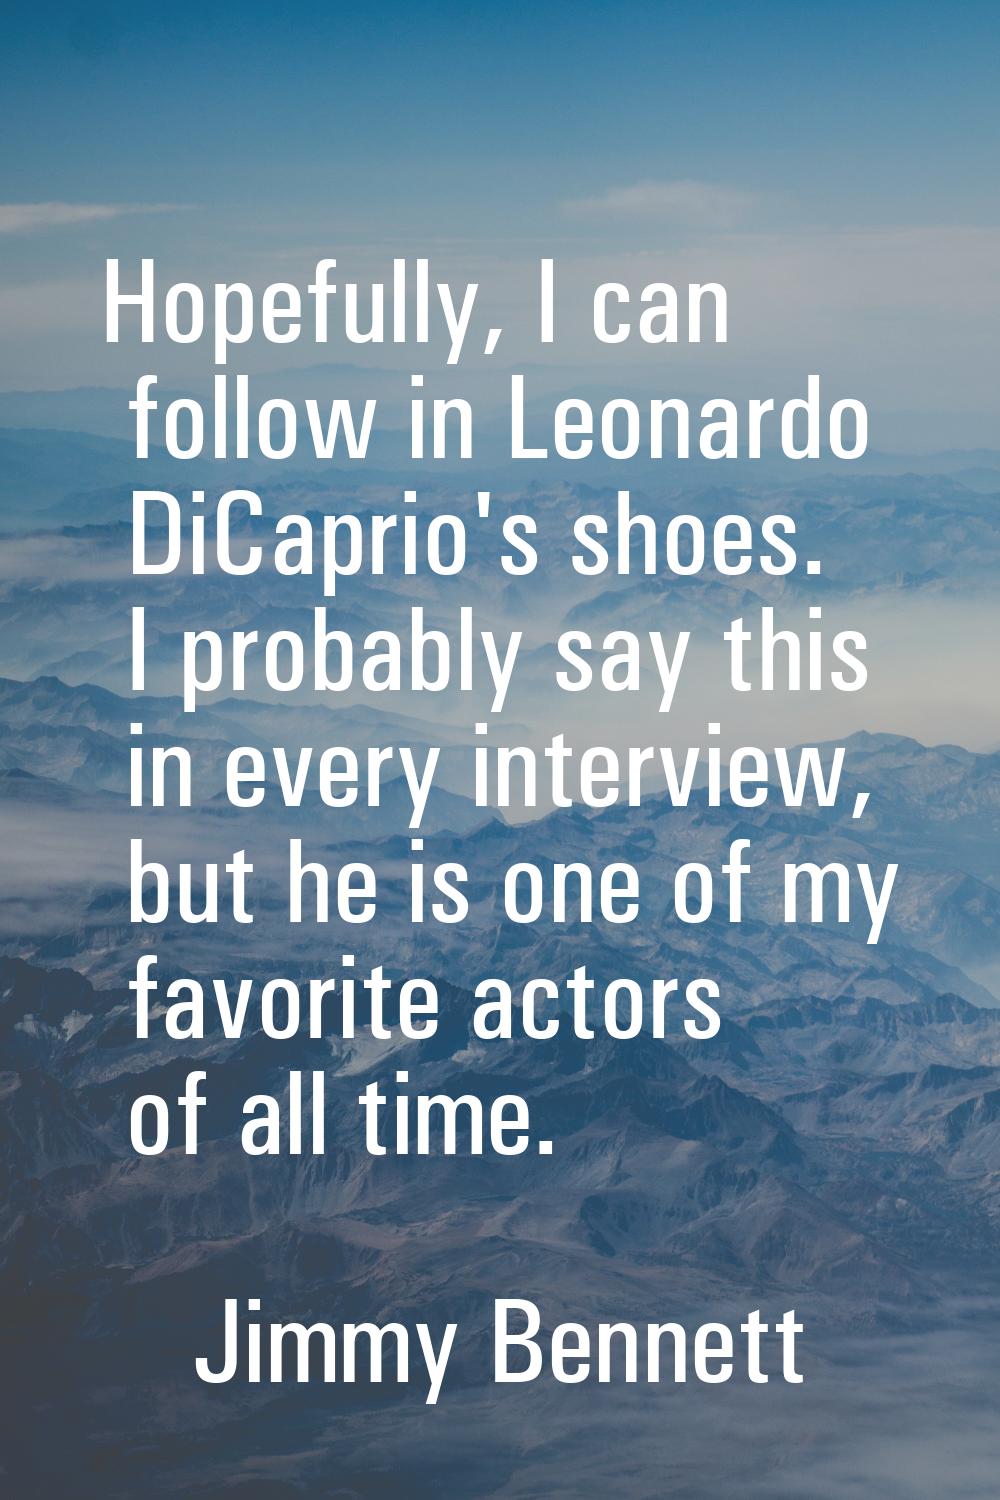 Hopefully, I can follow in Leonardo DiCaprio's shoes. I probably say this in every interview, but h